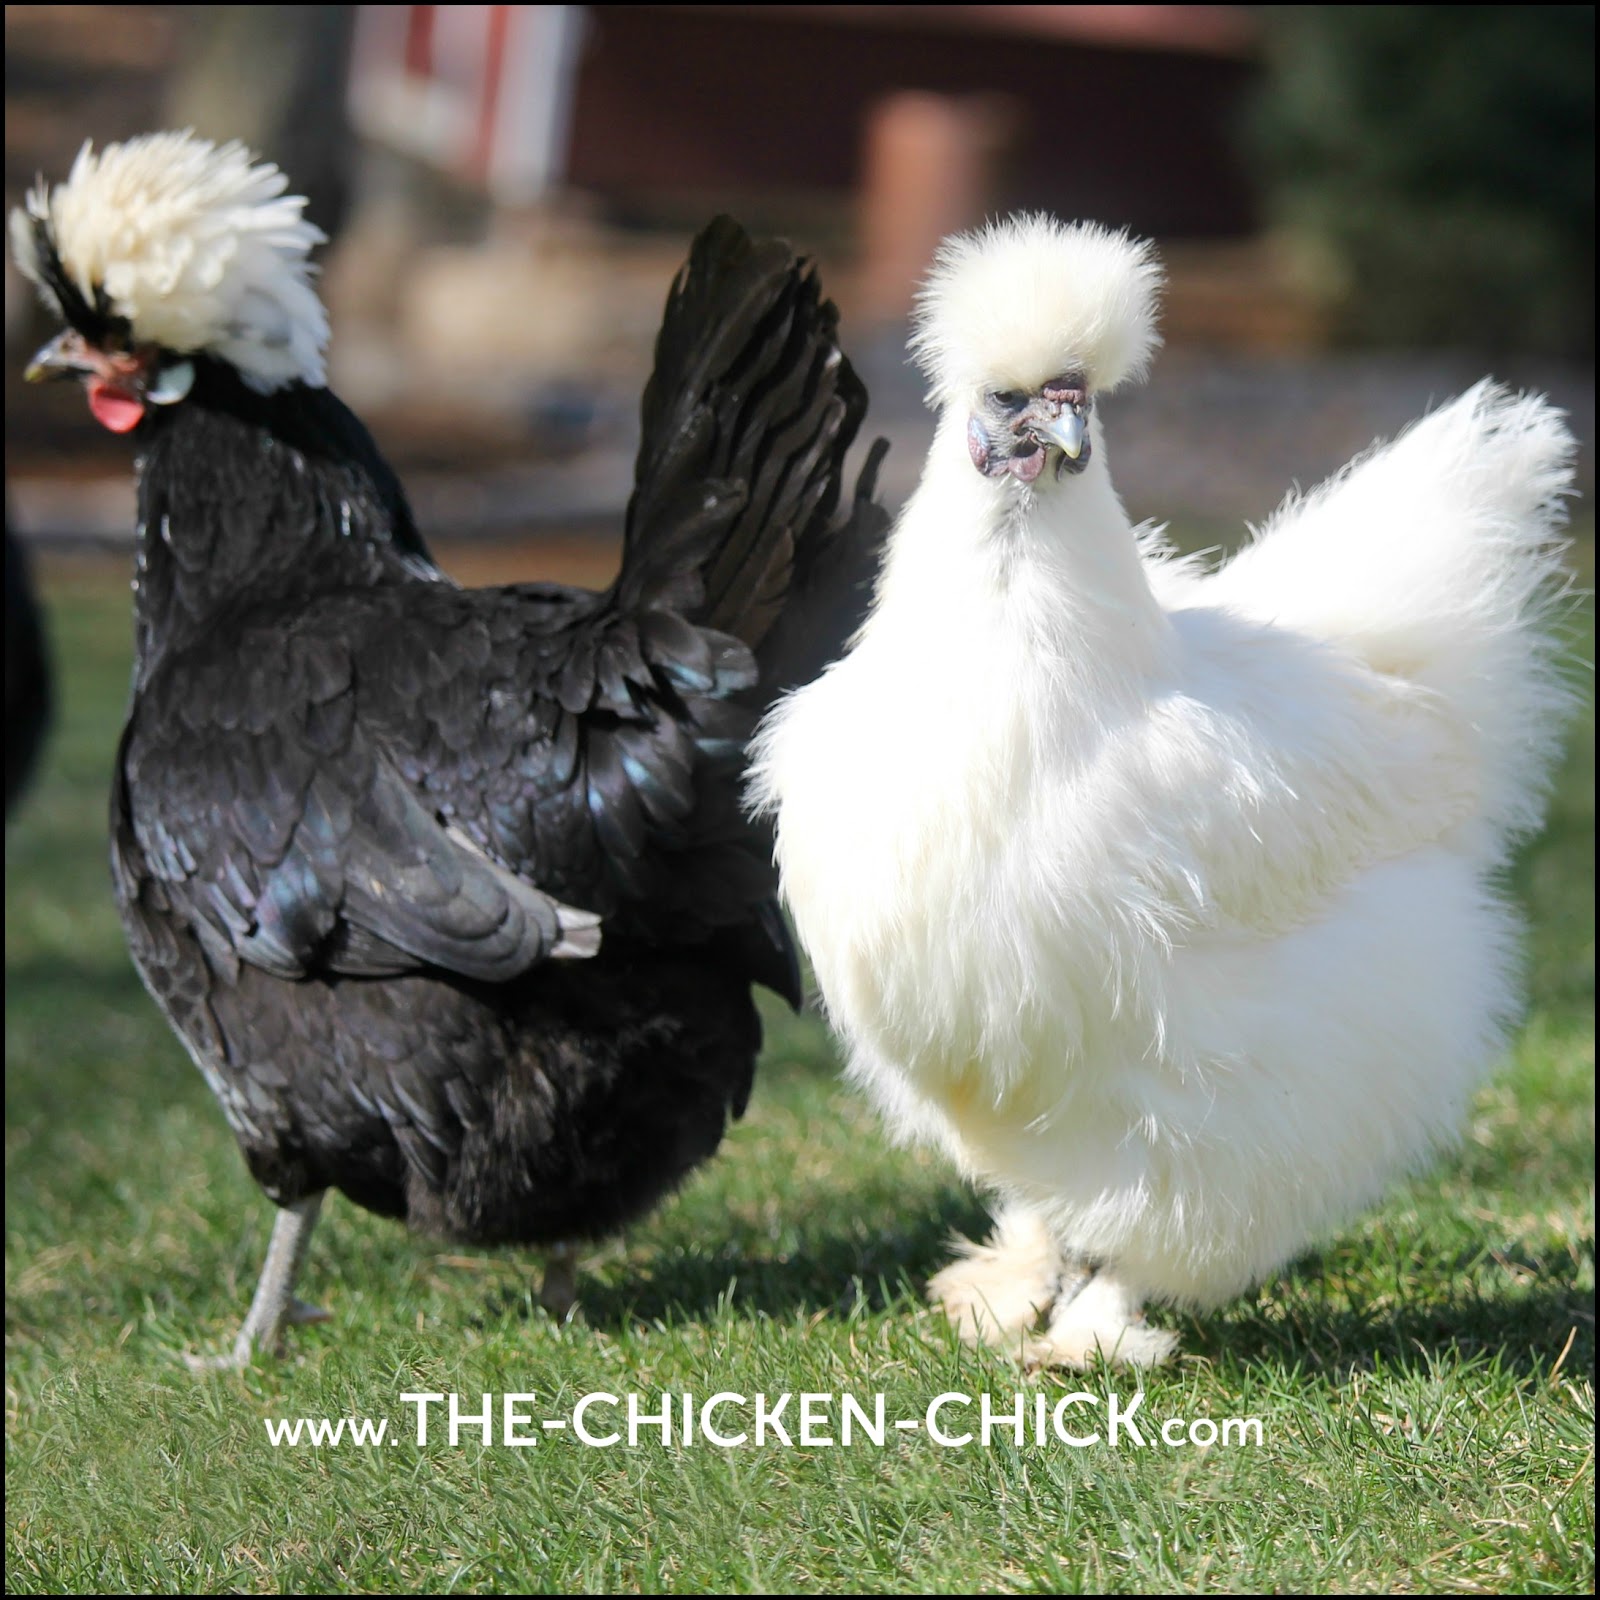 Crested Chickens The Chicken Chick_(2).jpg